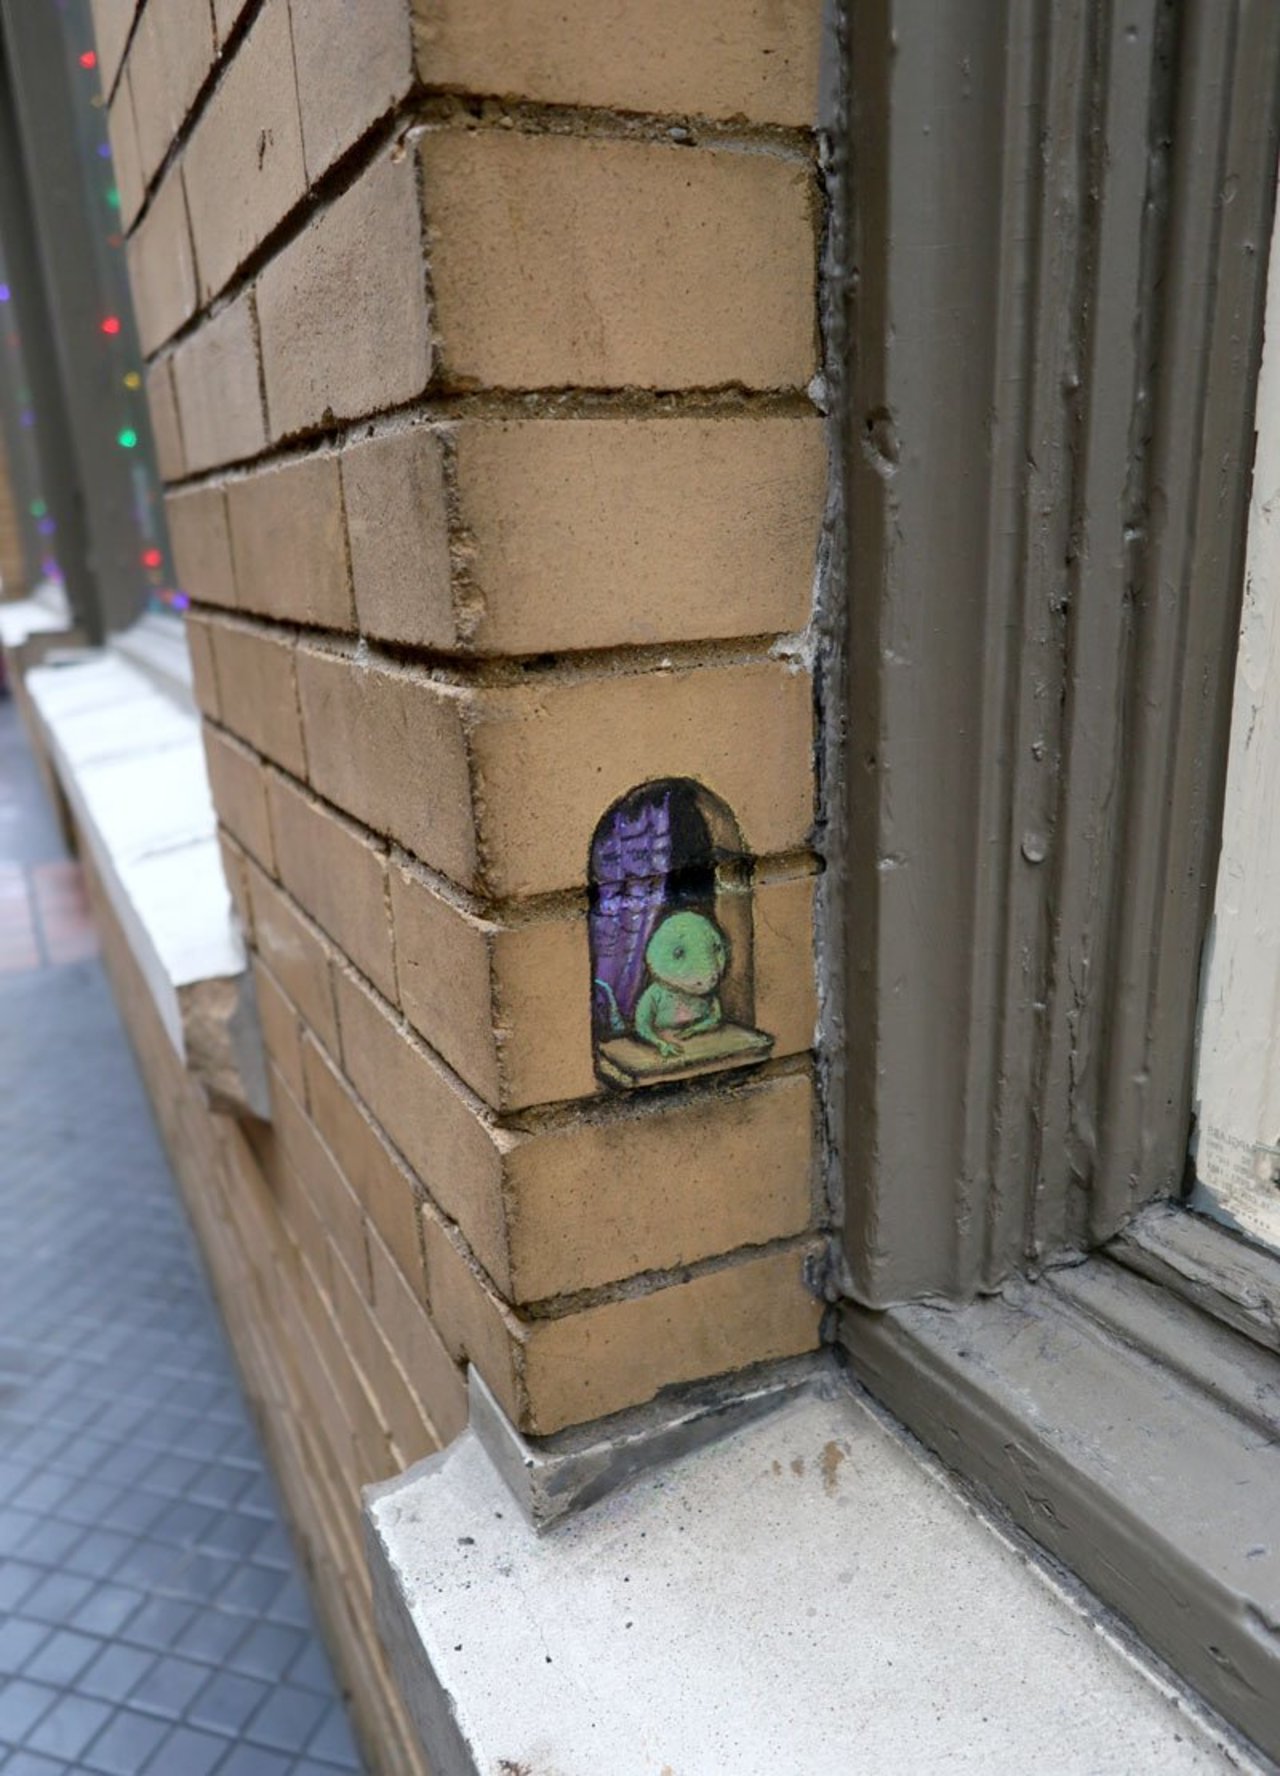 Went looking for a dry place to draw and stumbled across someone else waiting for the rain to stop. #streetart #sidewalkchalk #graffiti #lizard in #waiting https://t.co/7qH9kGGcih